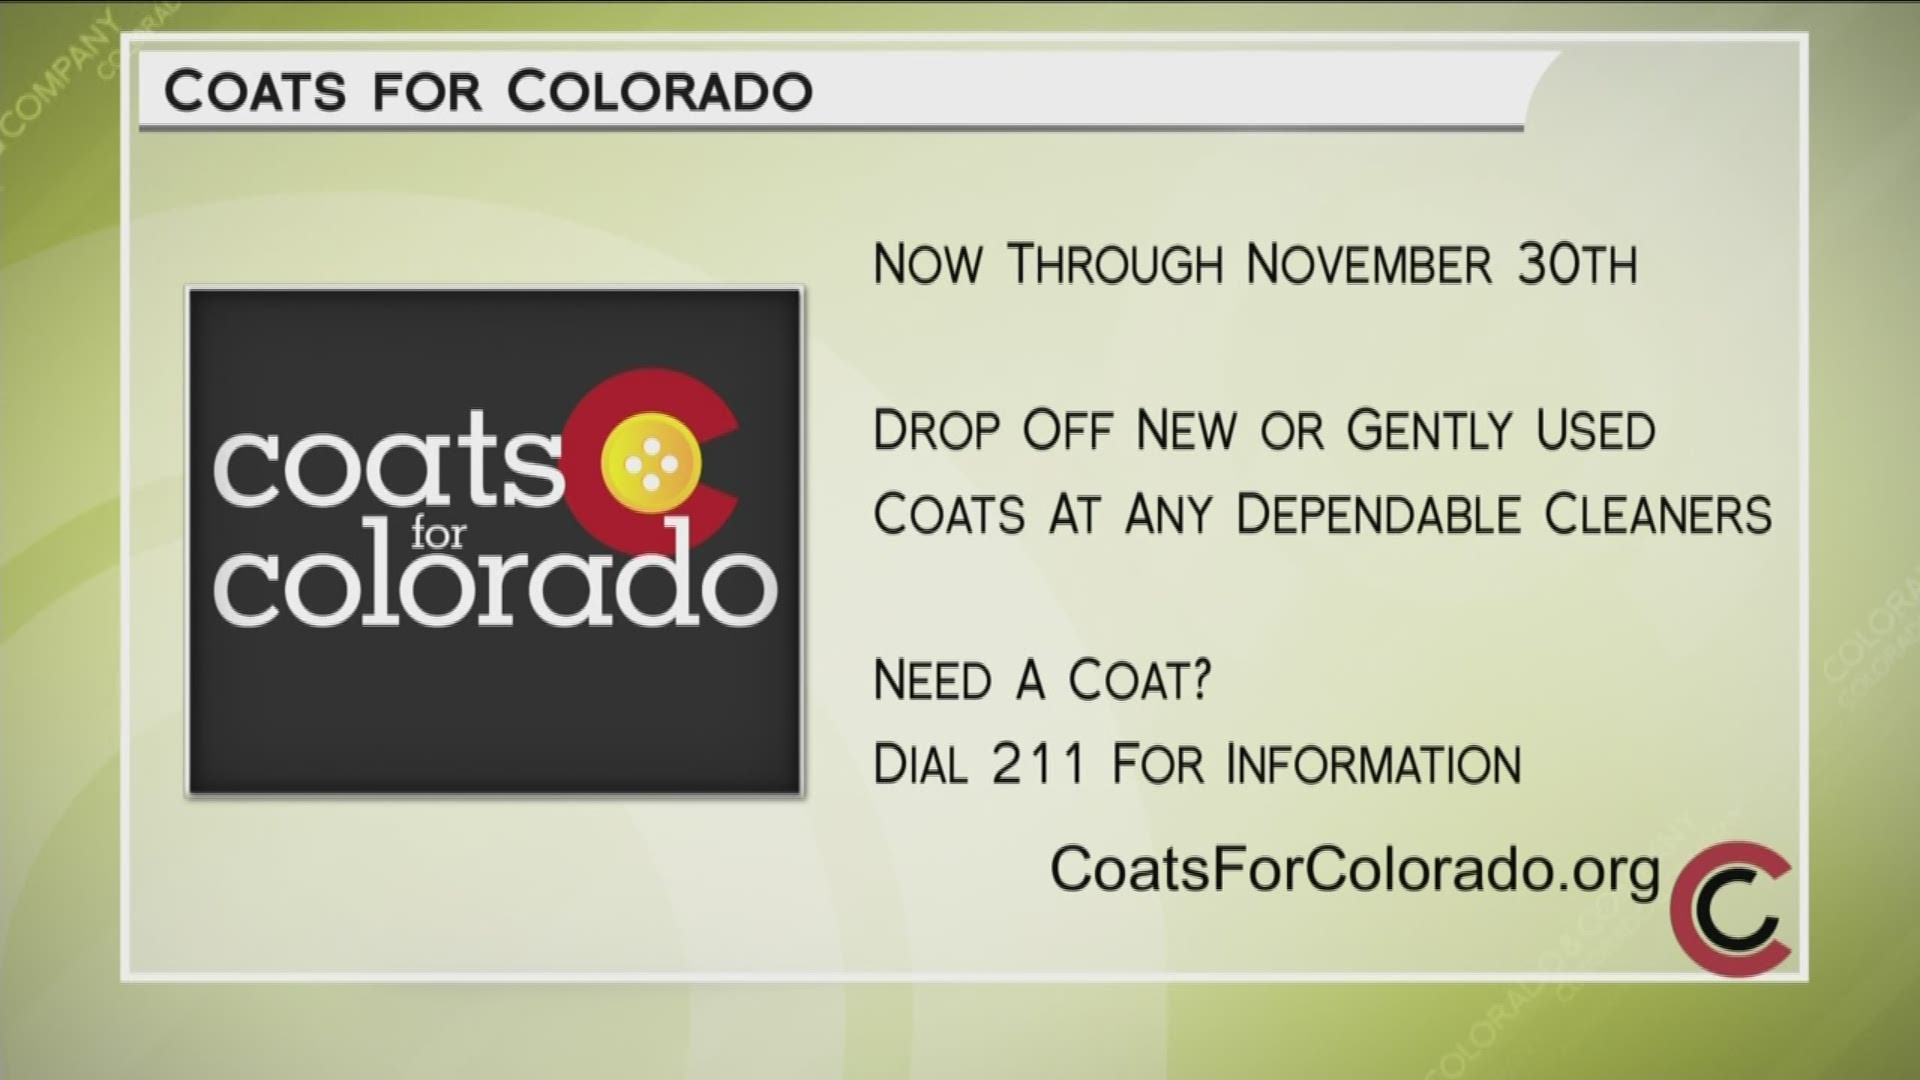 Help Colorado families stay warm this winter. Donate any new or gently used coat to any Dependable Cleaners location. Learn more at www.CoatsForColorado.org.